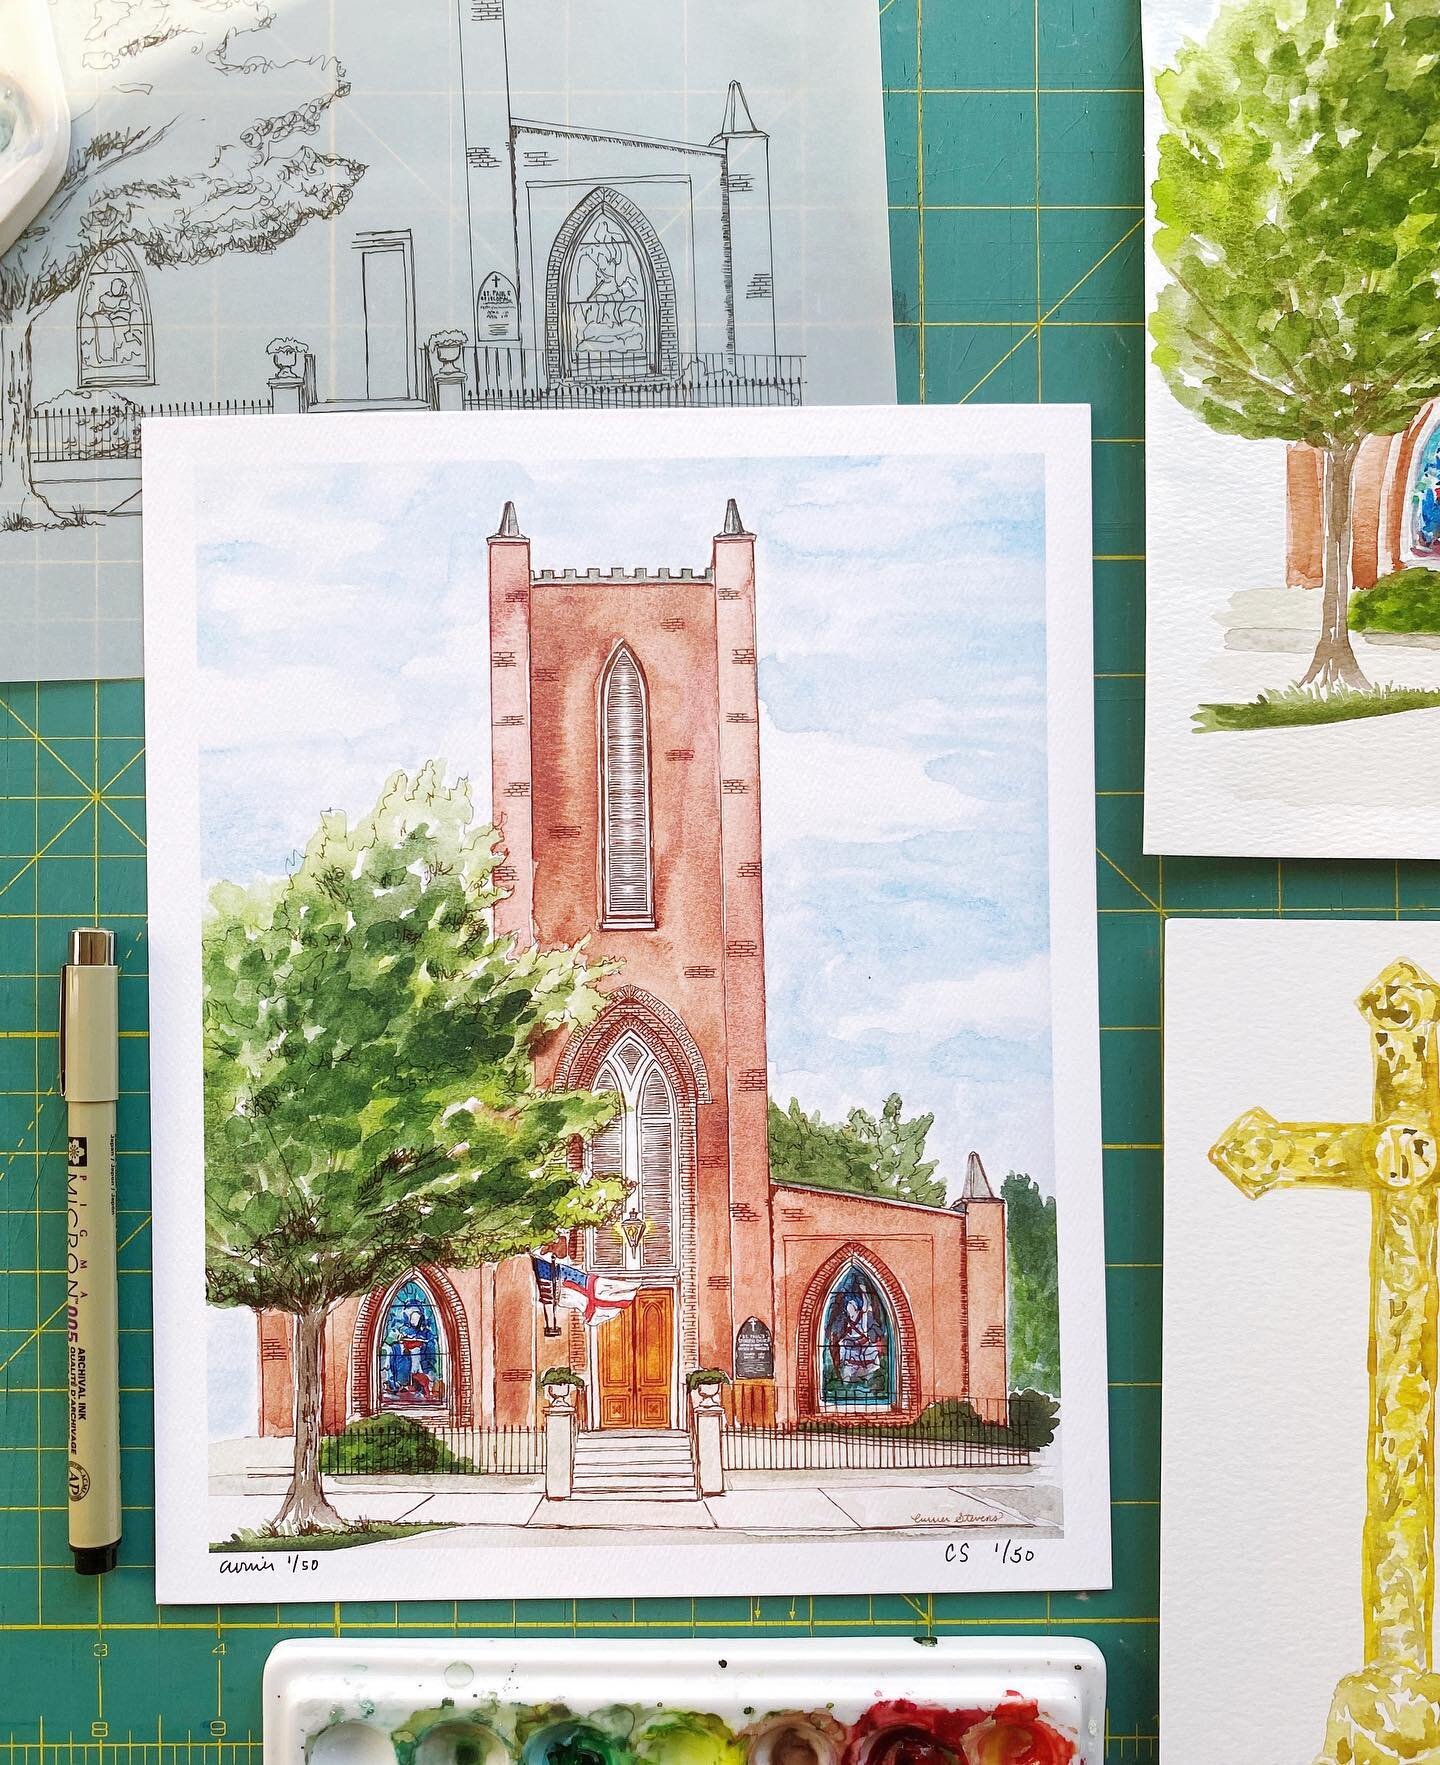 New artwork for @stpaulsfranklin Currier&rsquo;s church in downtown Franklin, that was founded in 1827. Their doors are still open and the  Tiffany stained-glass windows still glowing after all this time. 
.
.
.
#watercolorpainting #franklintn #color